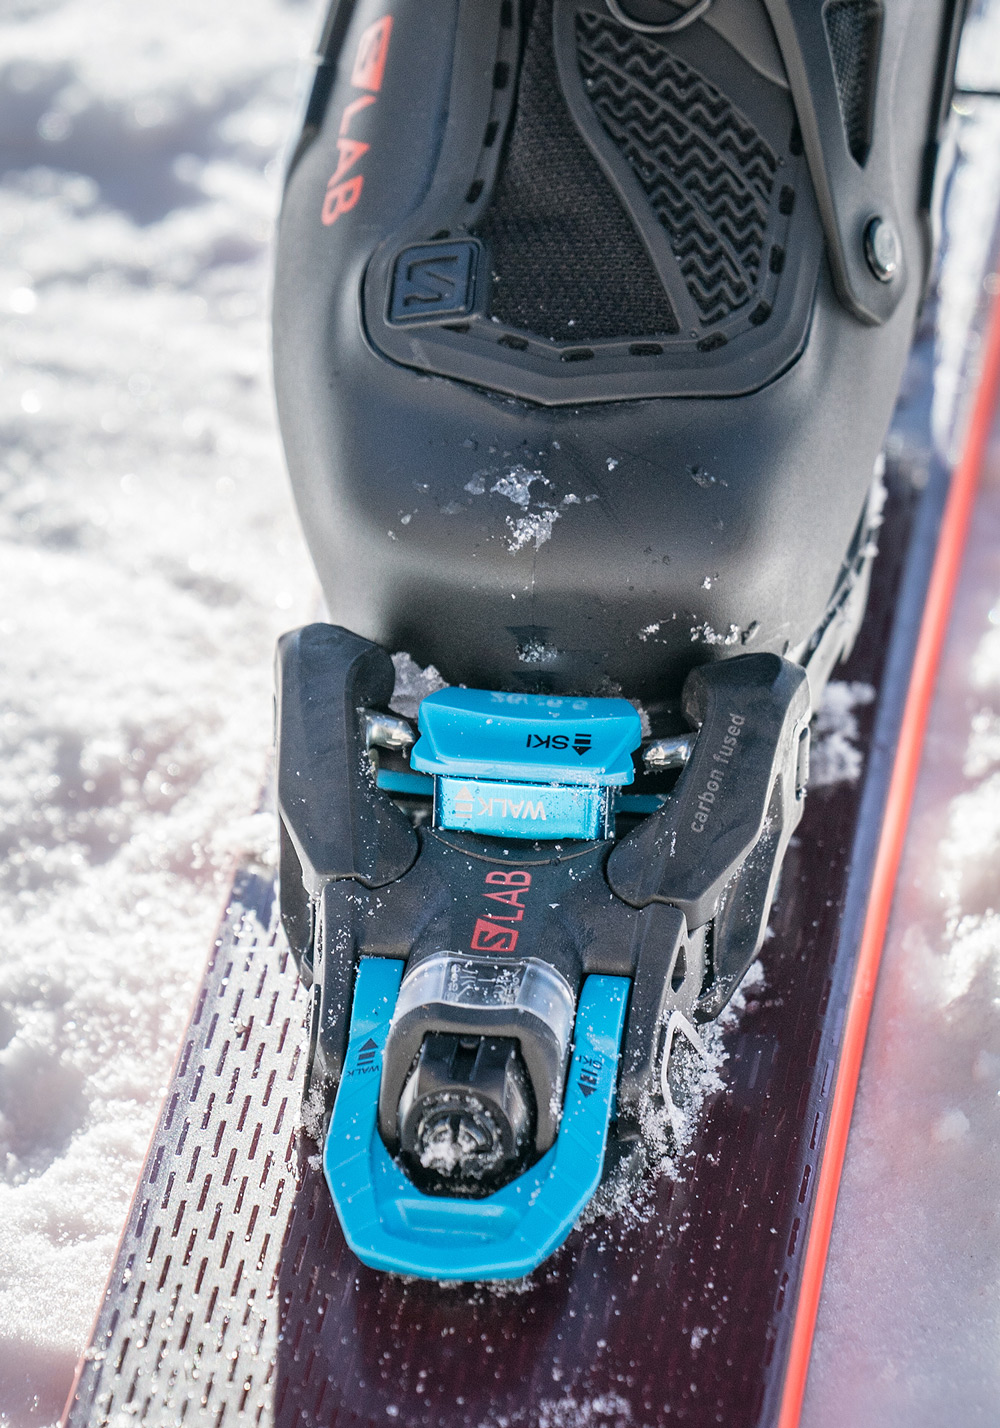 Salomon Touring Binding Says Changes Backcountry Skiing Performance - Snowsports Industries America